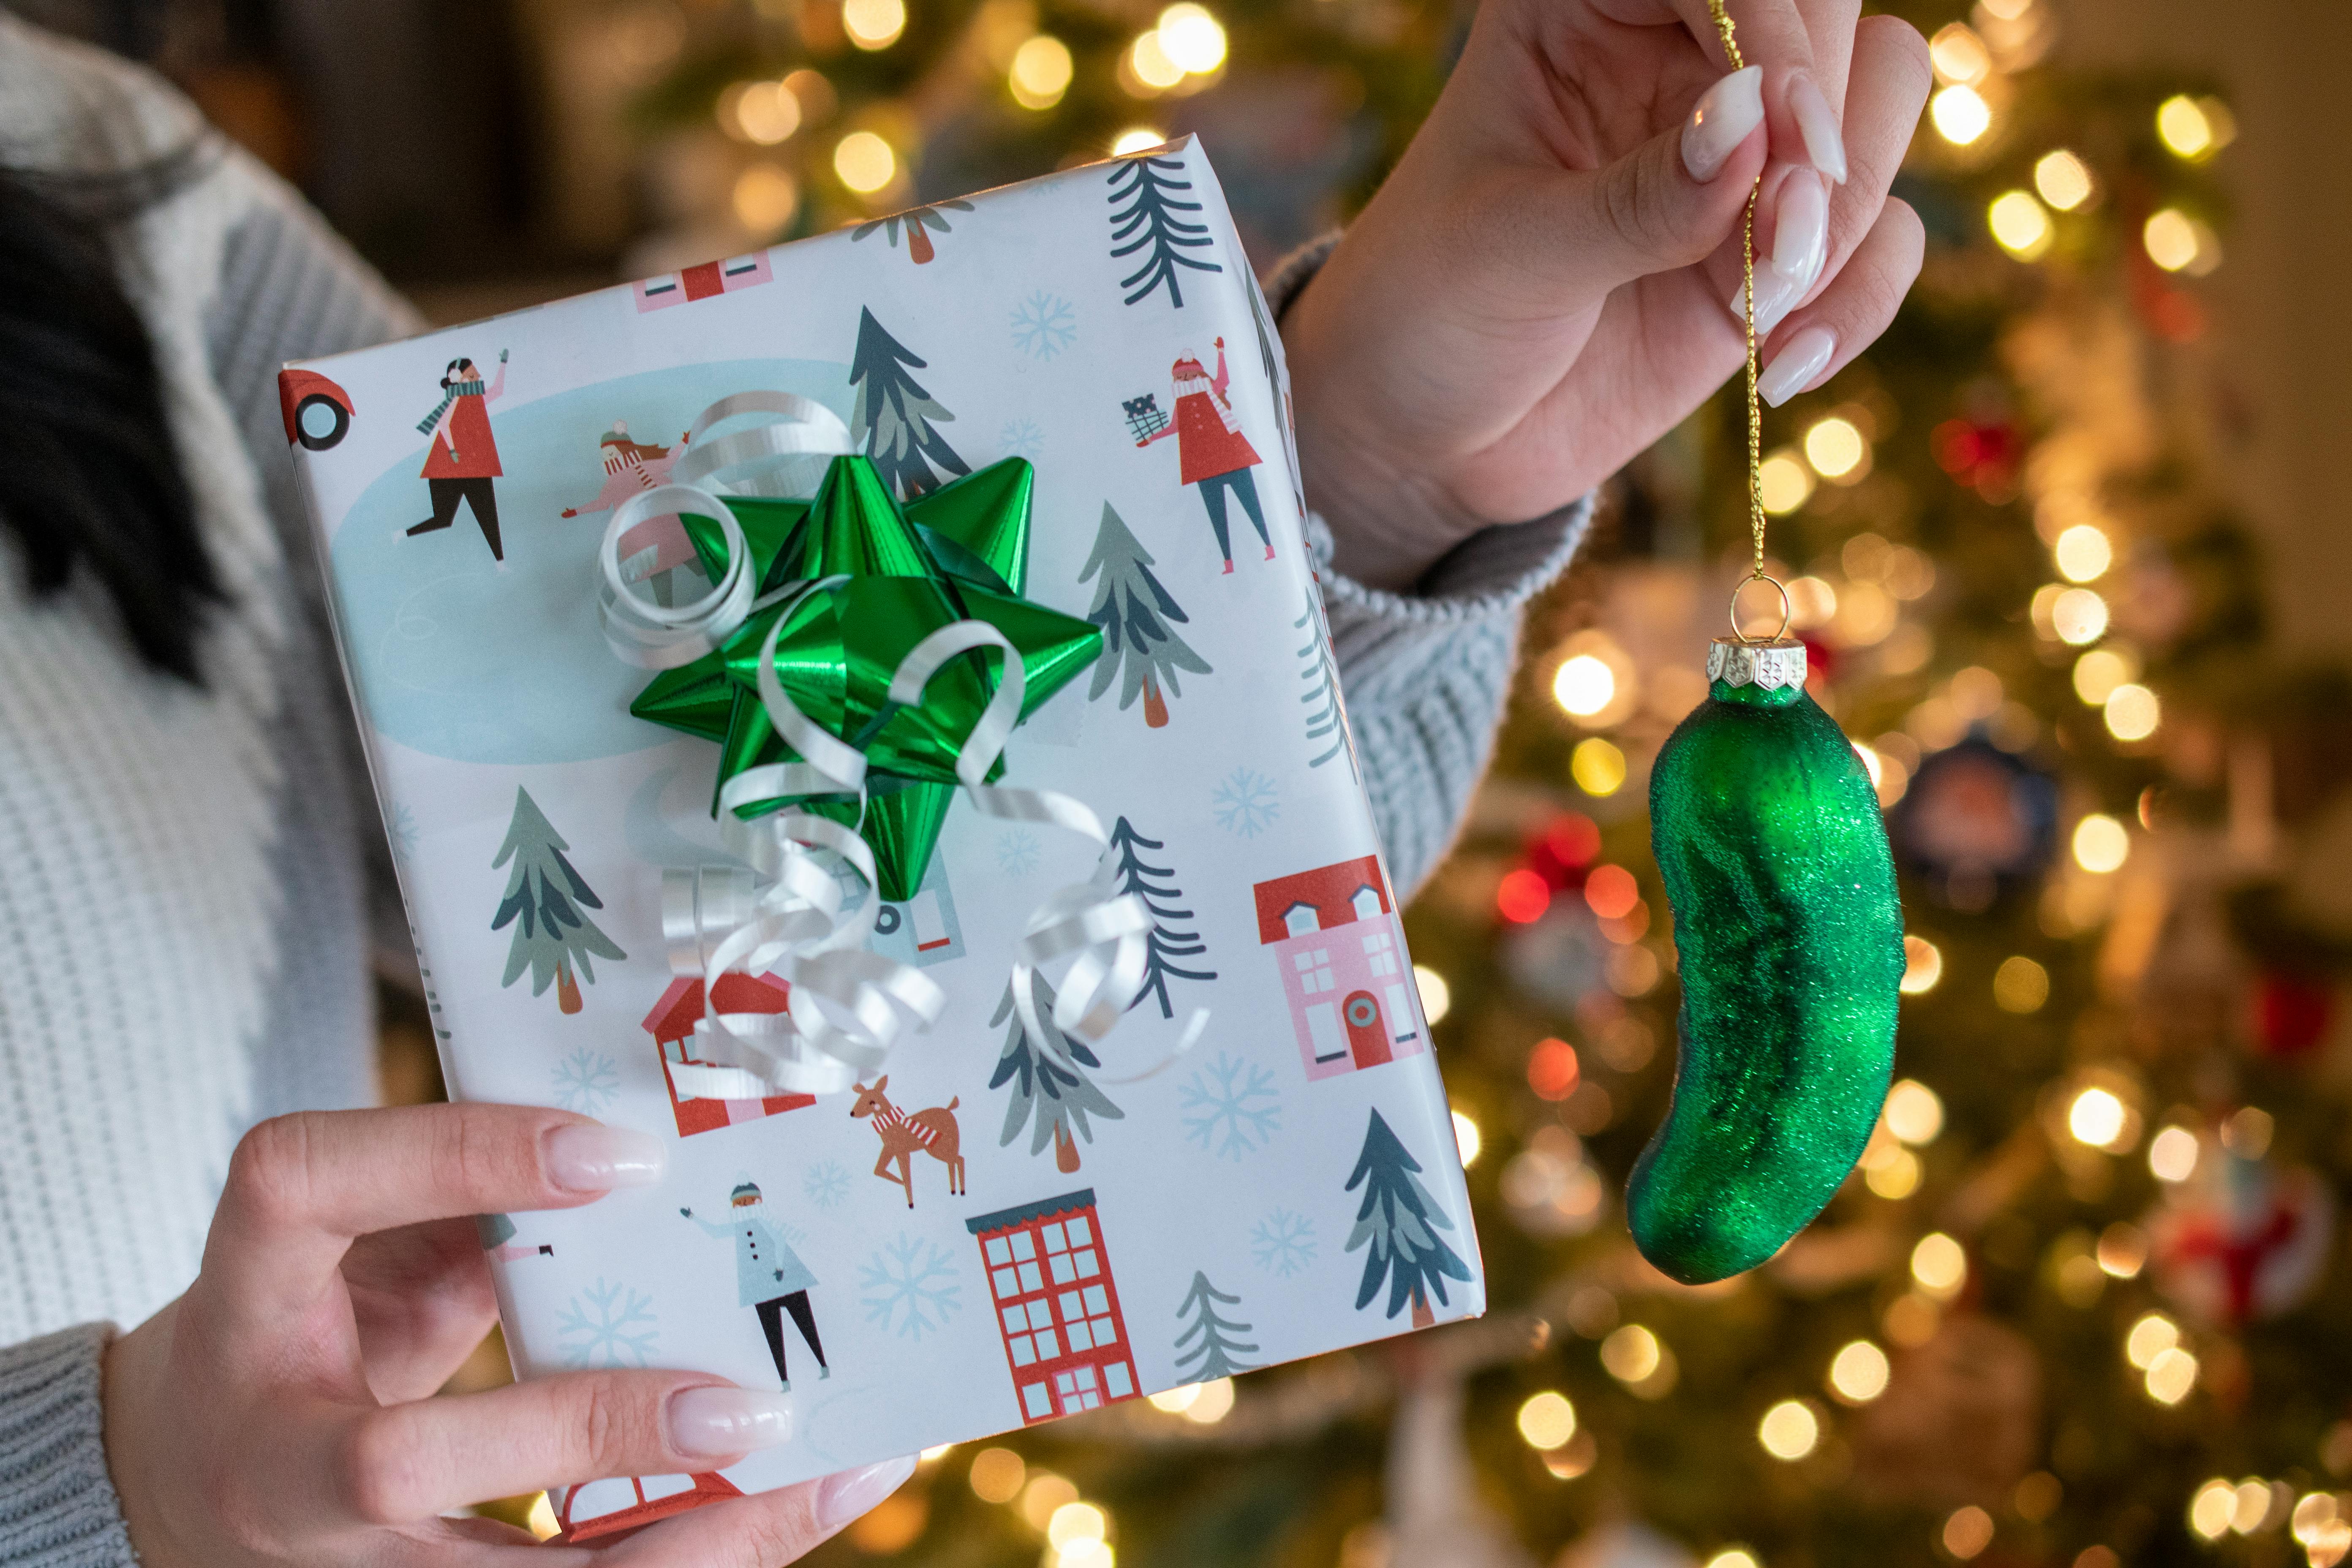 An green pickle Christmas ornament held next to a gift box.